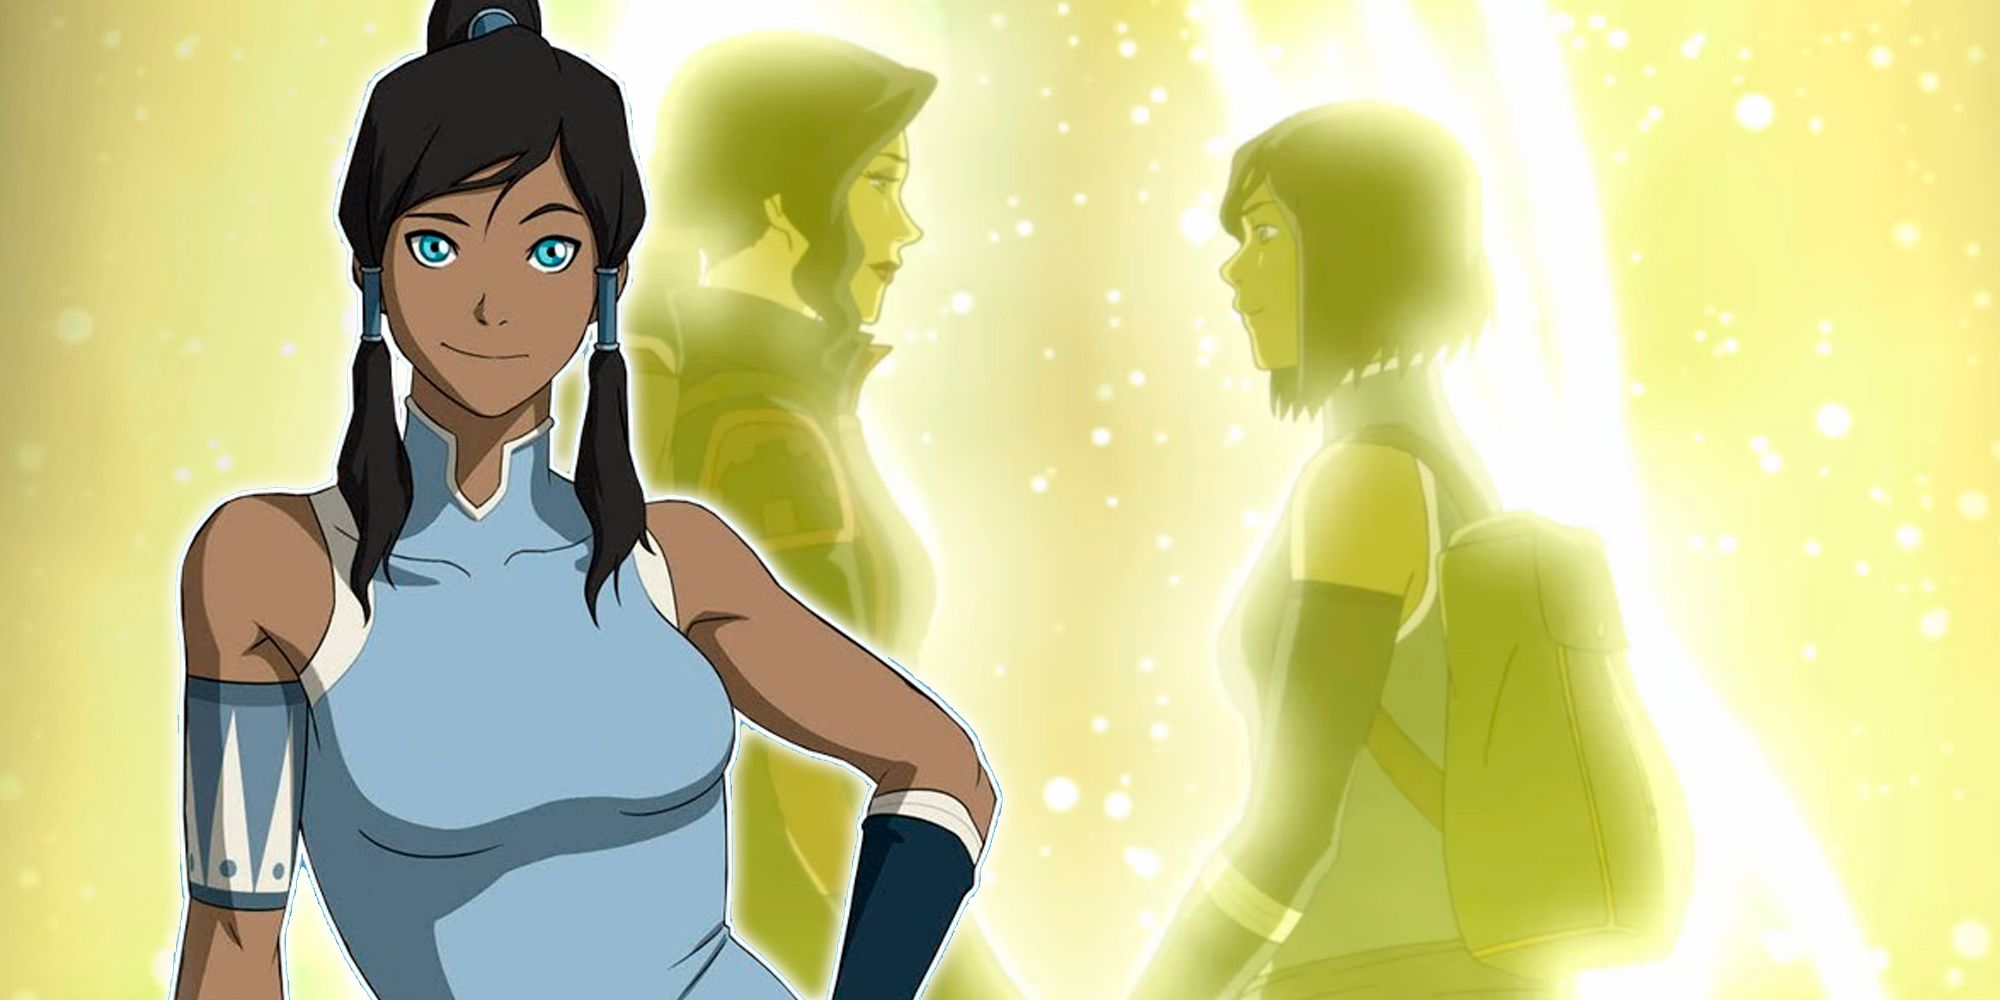 A blended image features Korra in the foreground and Asami and Korra holding hands in the spirit portal in the background for The Legend of Korra